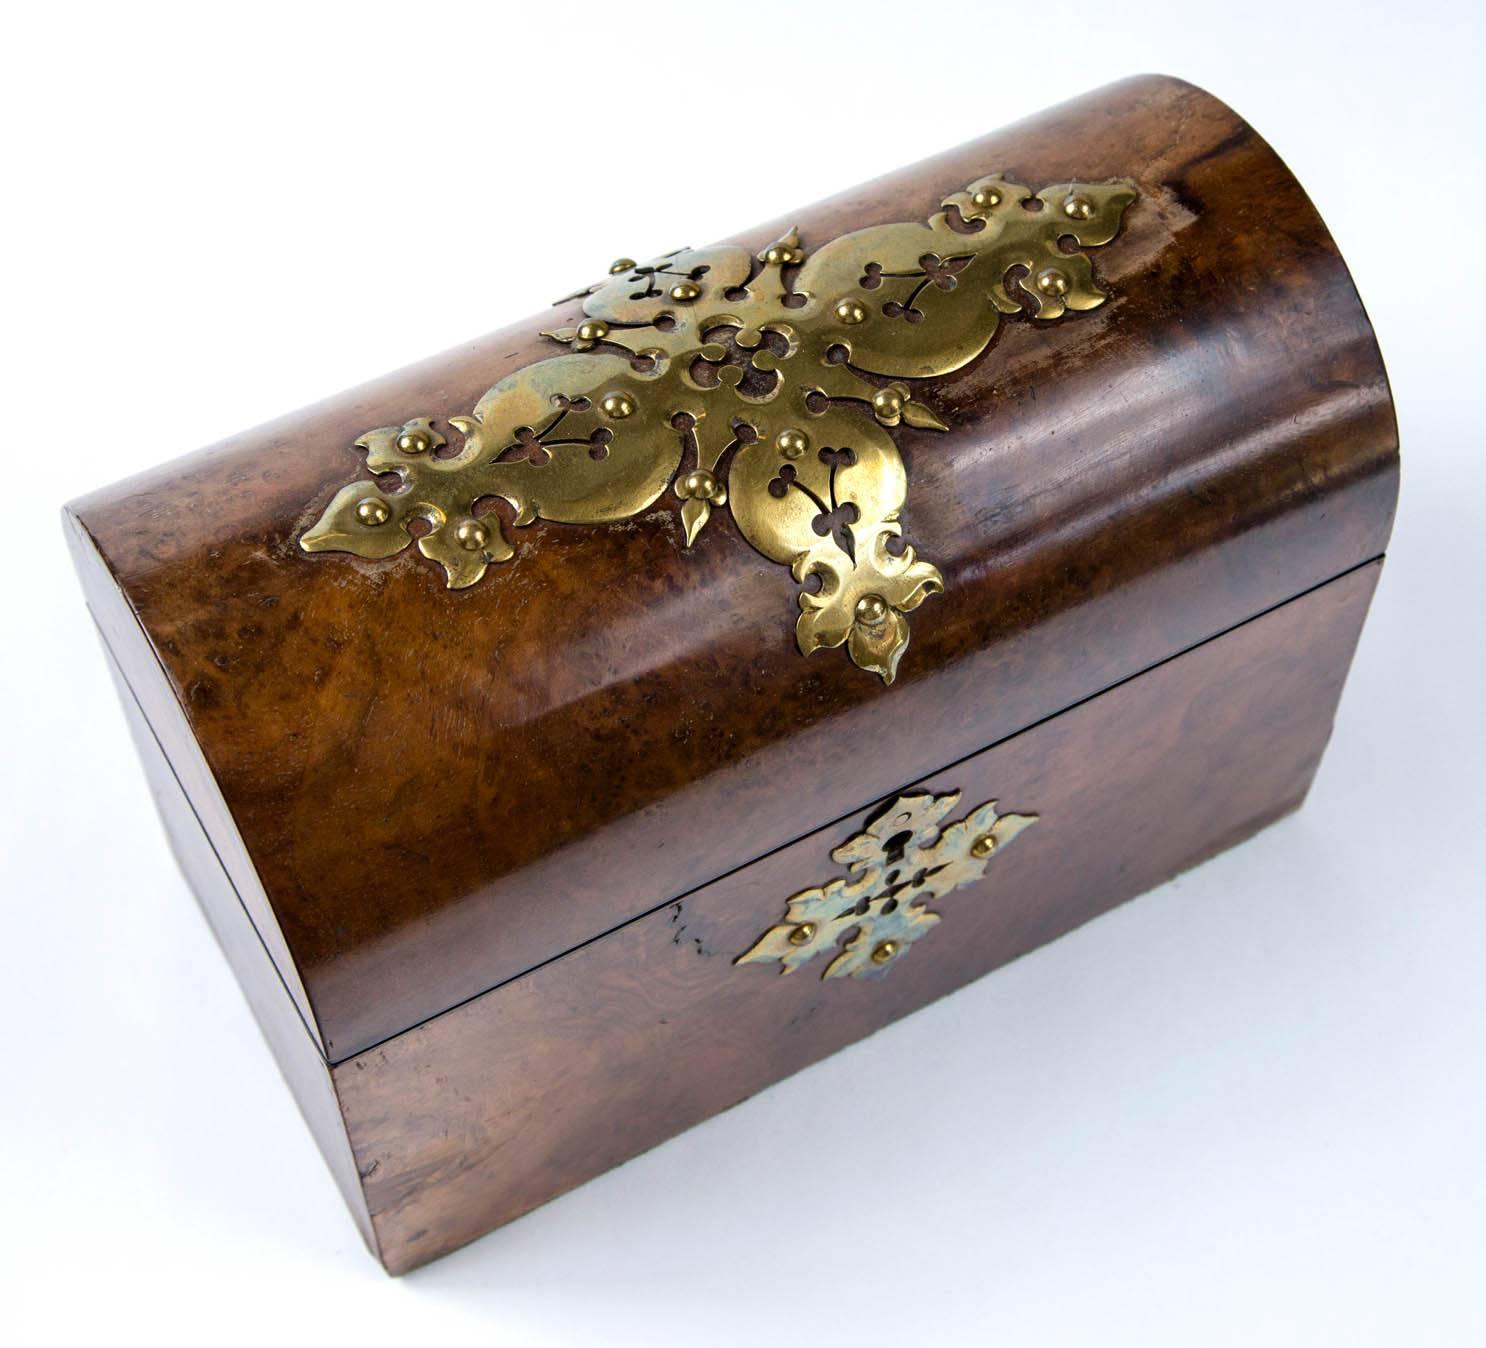 Antique English 1850 burl walnut dome keepsake, letter/treasure/memory box, with brass front medallion.
Signed by Simpson & Co.
Eight compartments, green felt bottom, with a blue silk lining.
The condition of this piece consists with the age from